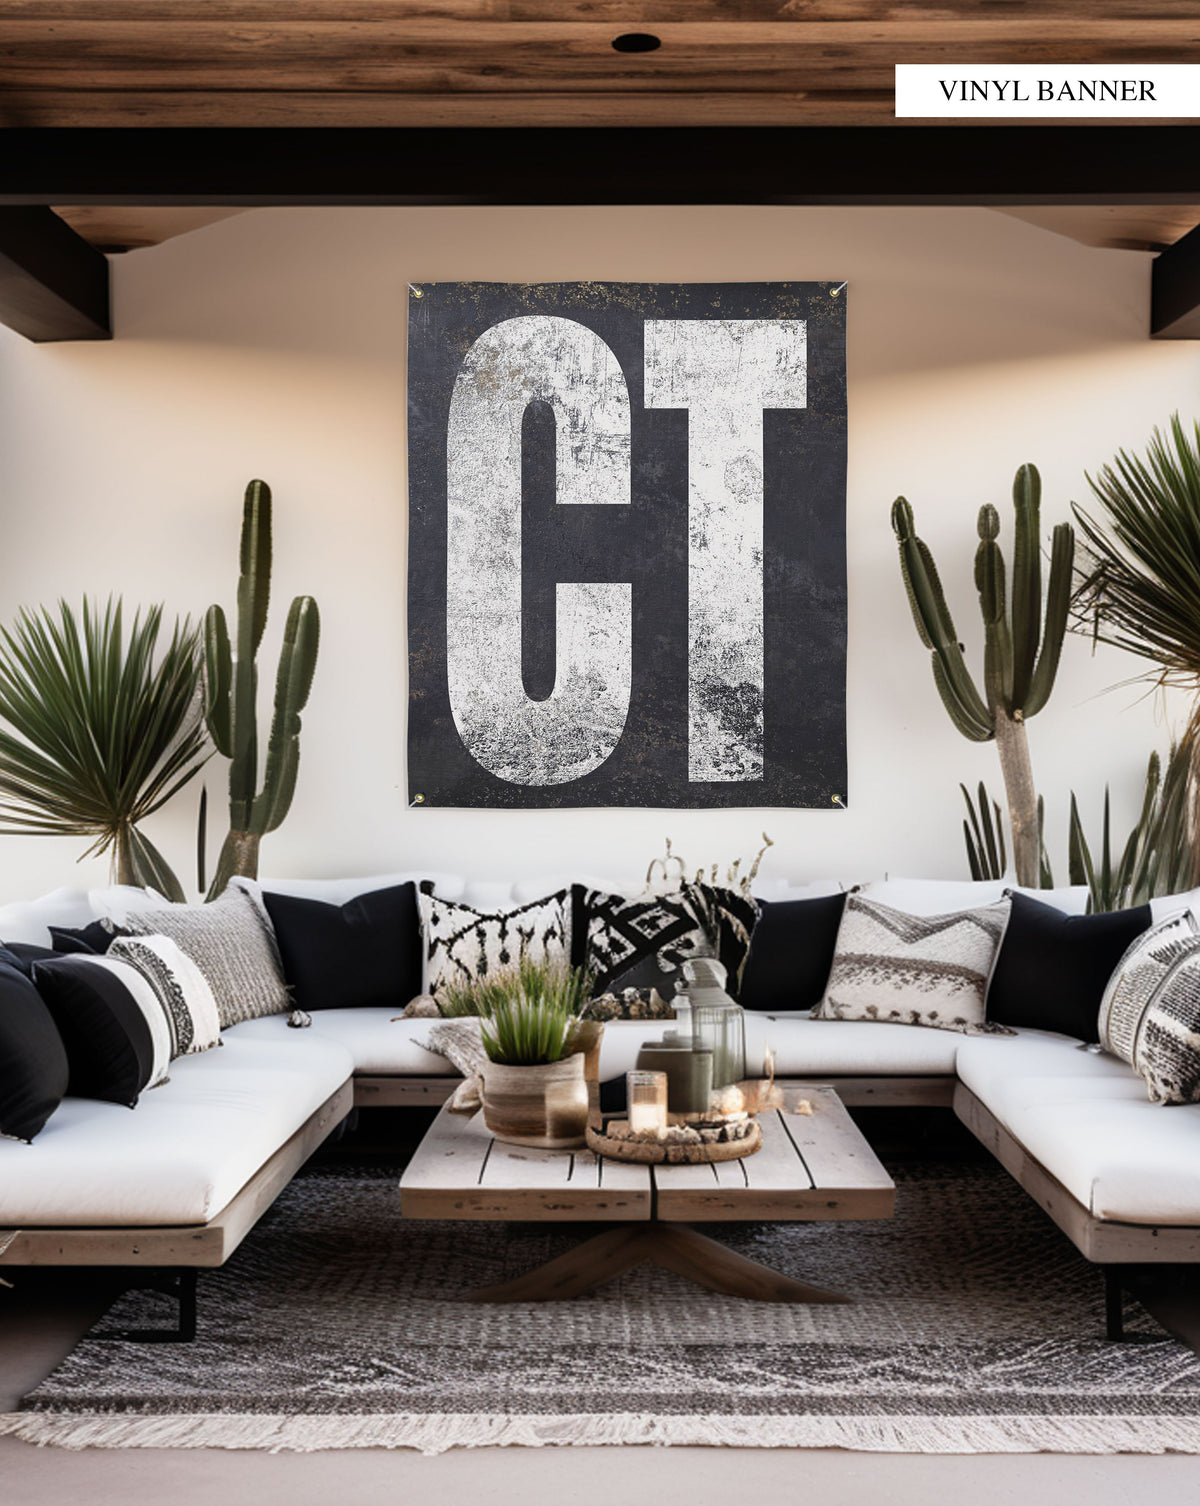 "Chic Outdoor Patio Decor Vinyl Tapestry for Connecticut: With its eye-catching typography, this tapestry adds a personalized touch to gardens or home bars, serving as a durable tribute to Connecticut’s charm."